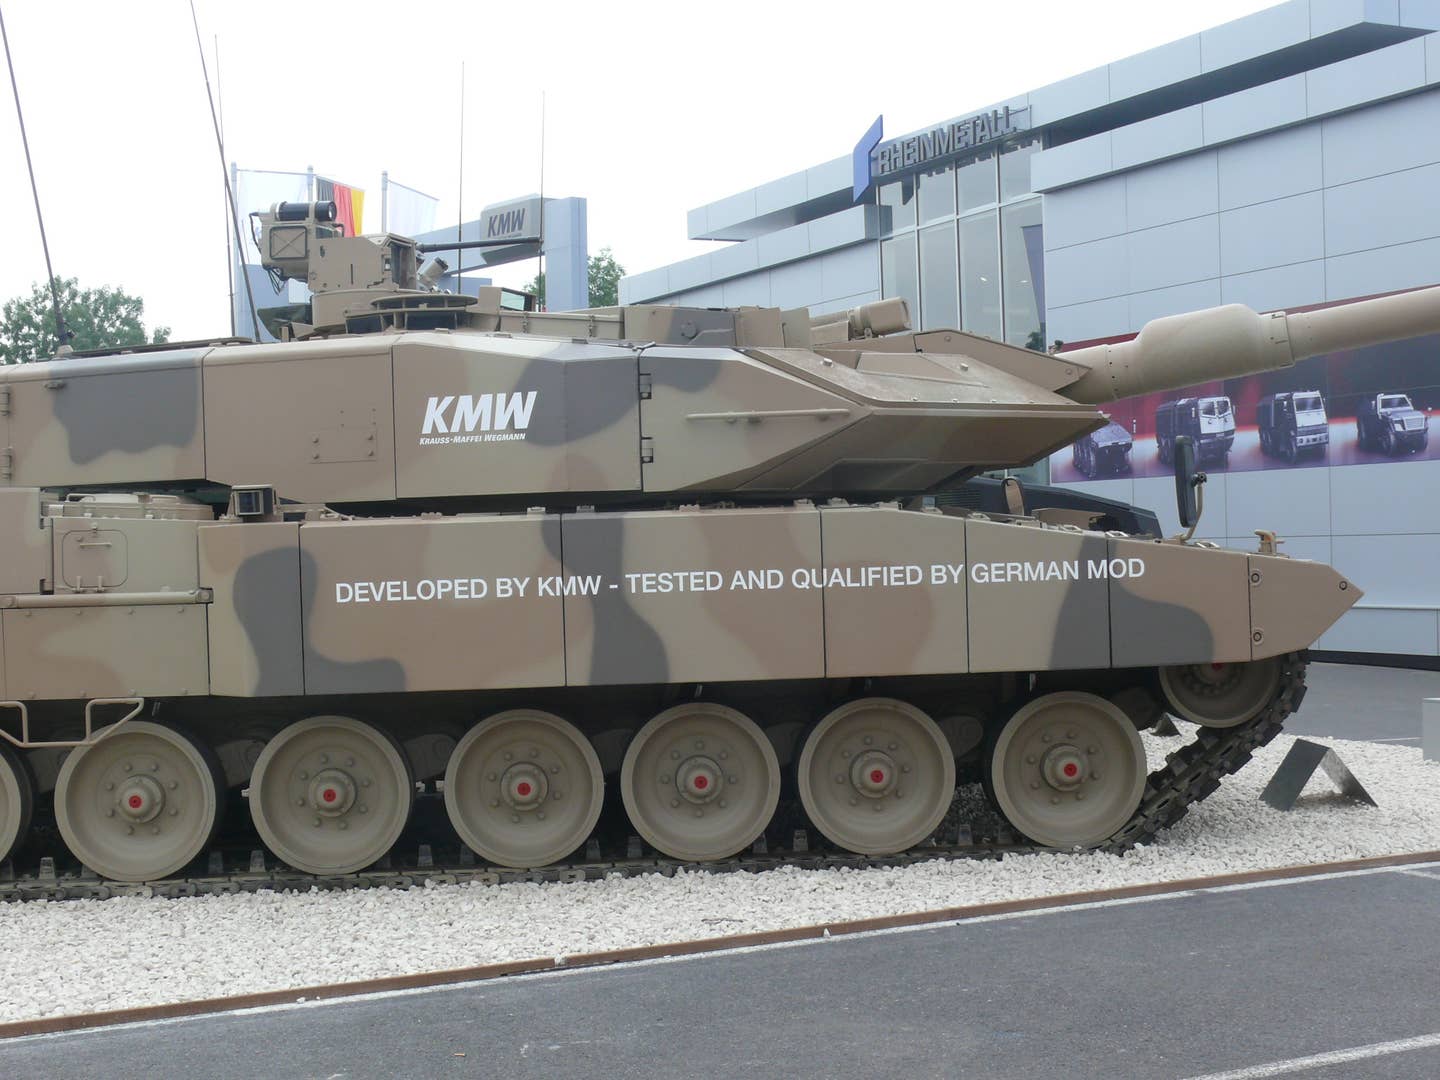 The prototype Leopard 2A7+. (Wikimedia Commons)